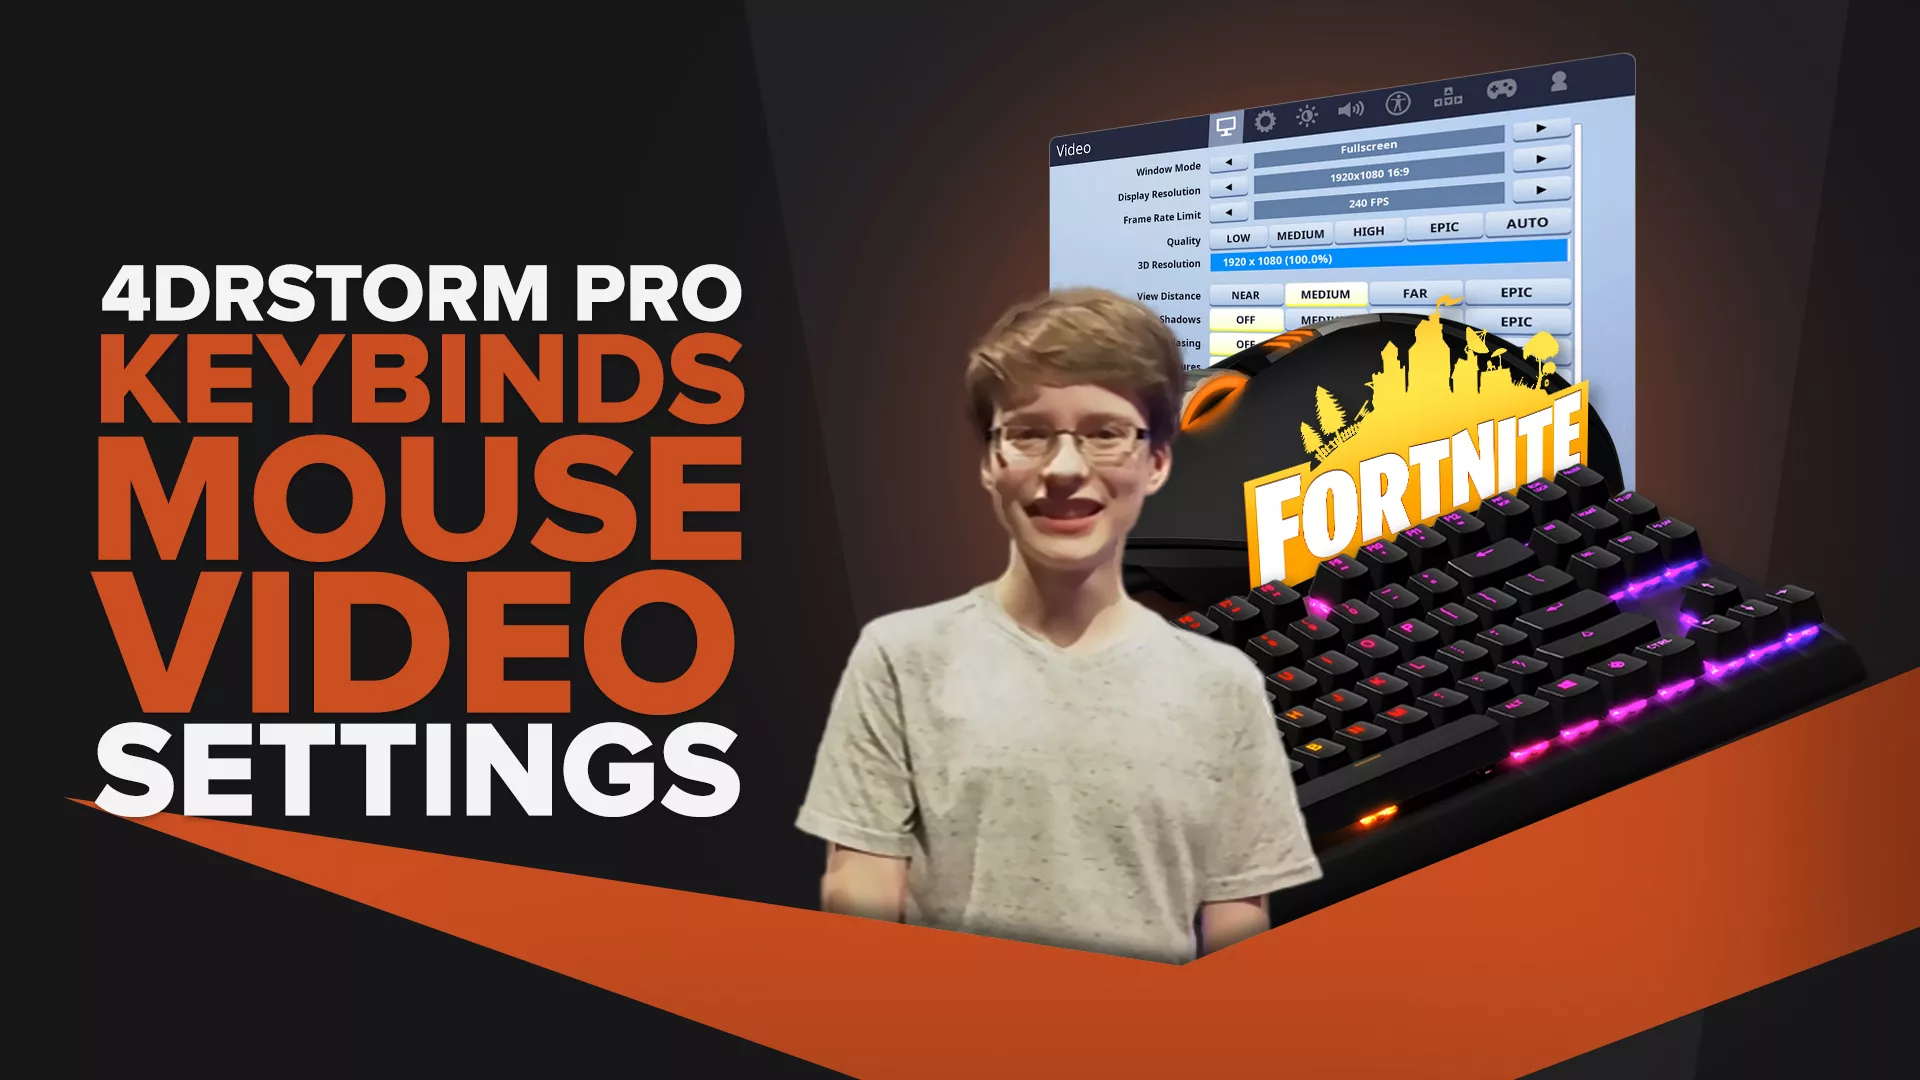 4drstorm | Keybinds, Mouse, Video Pro Fortnite Settings